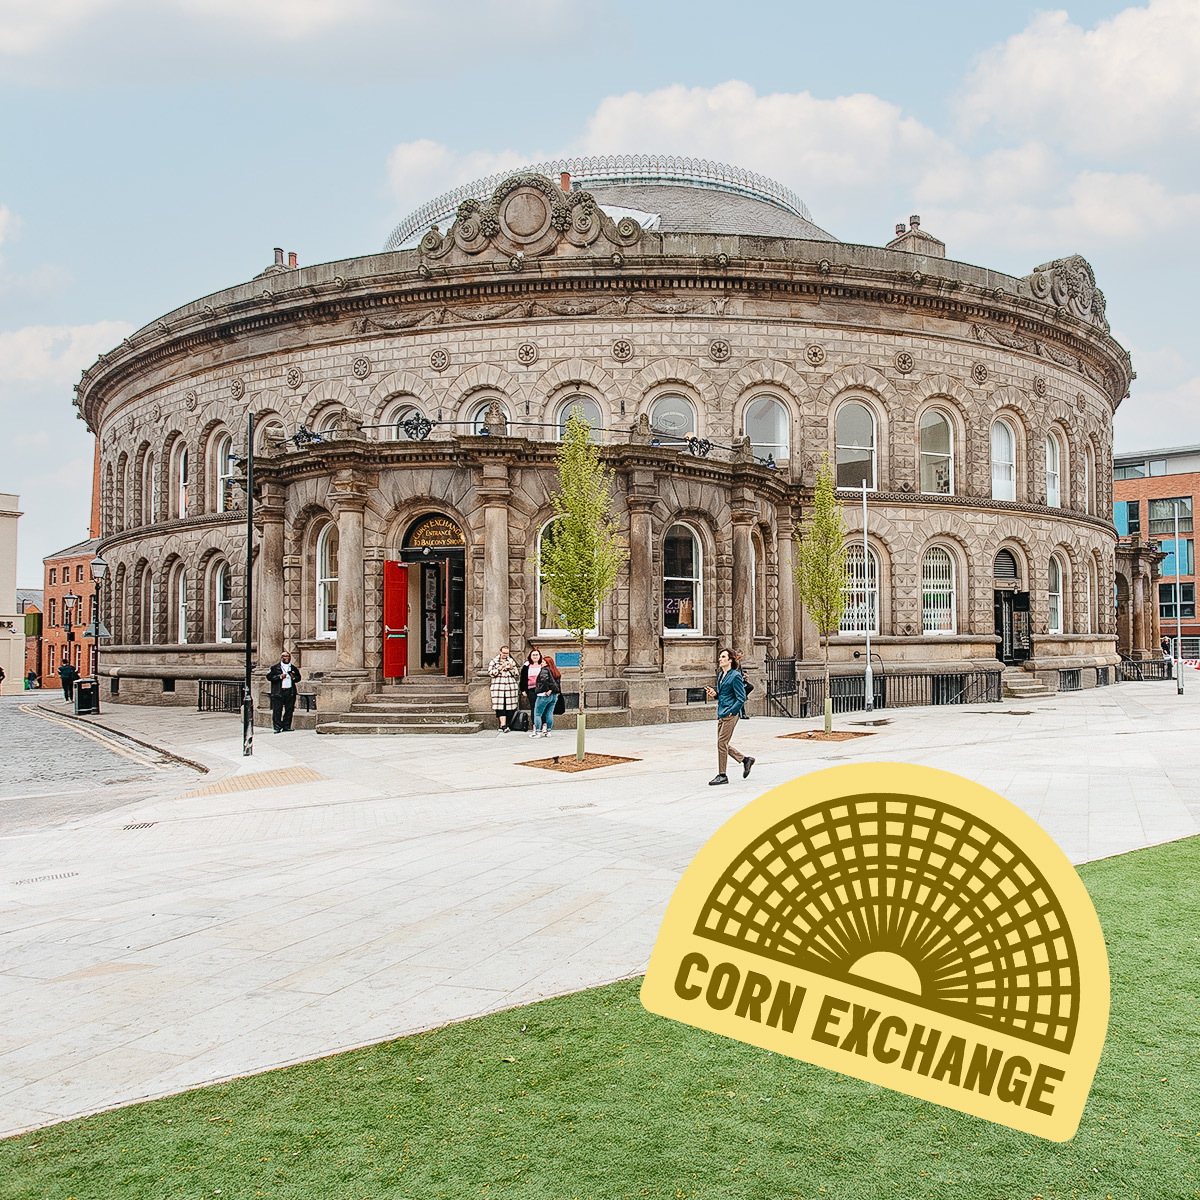 ICYMI. We unveiled the incredible new #CornExchange Square last month, and you lot have been loving our new landscape so far. Keep your eyes peeled for lots of exciting things coming your way fresh from the square 🎉 #Leeds #LeedsCornExchange